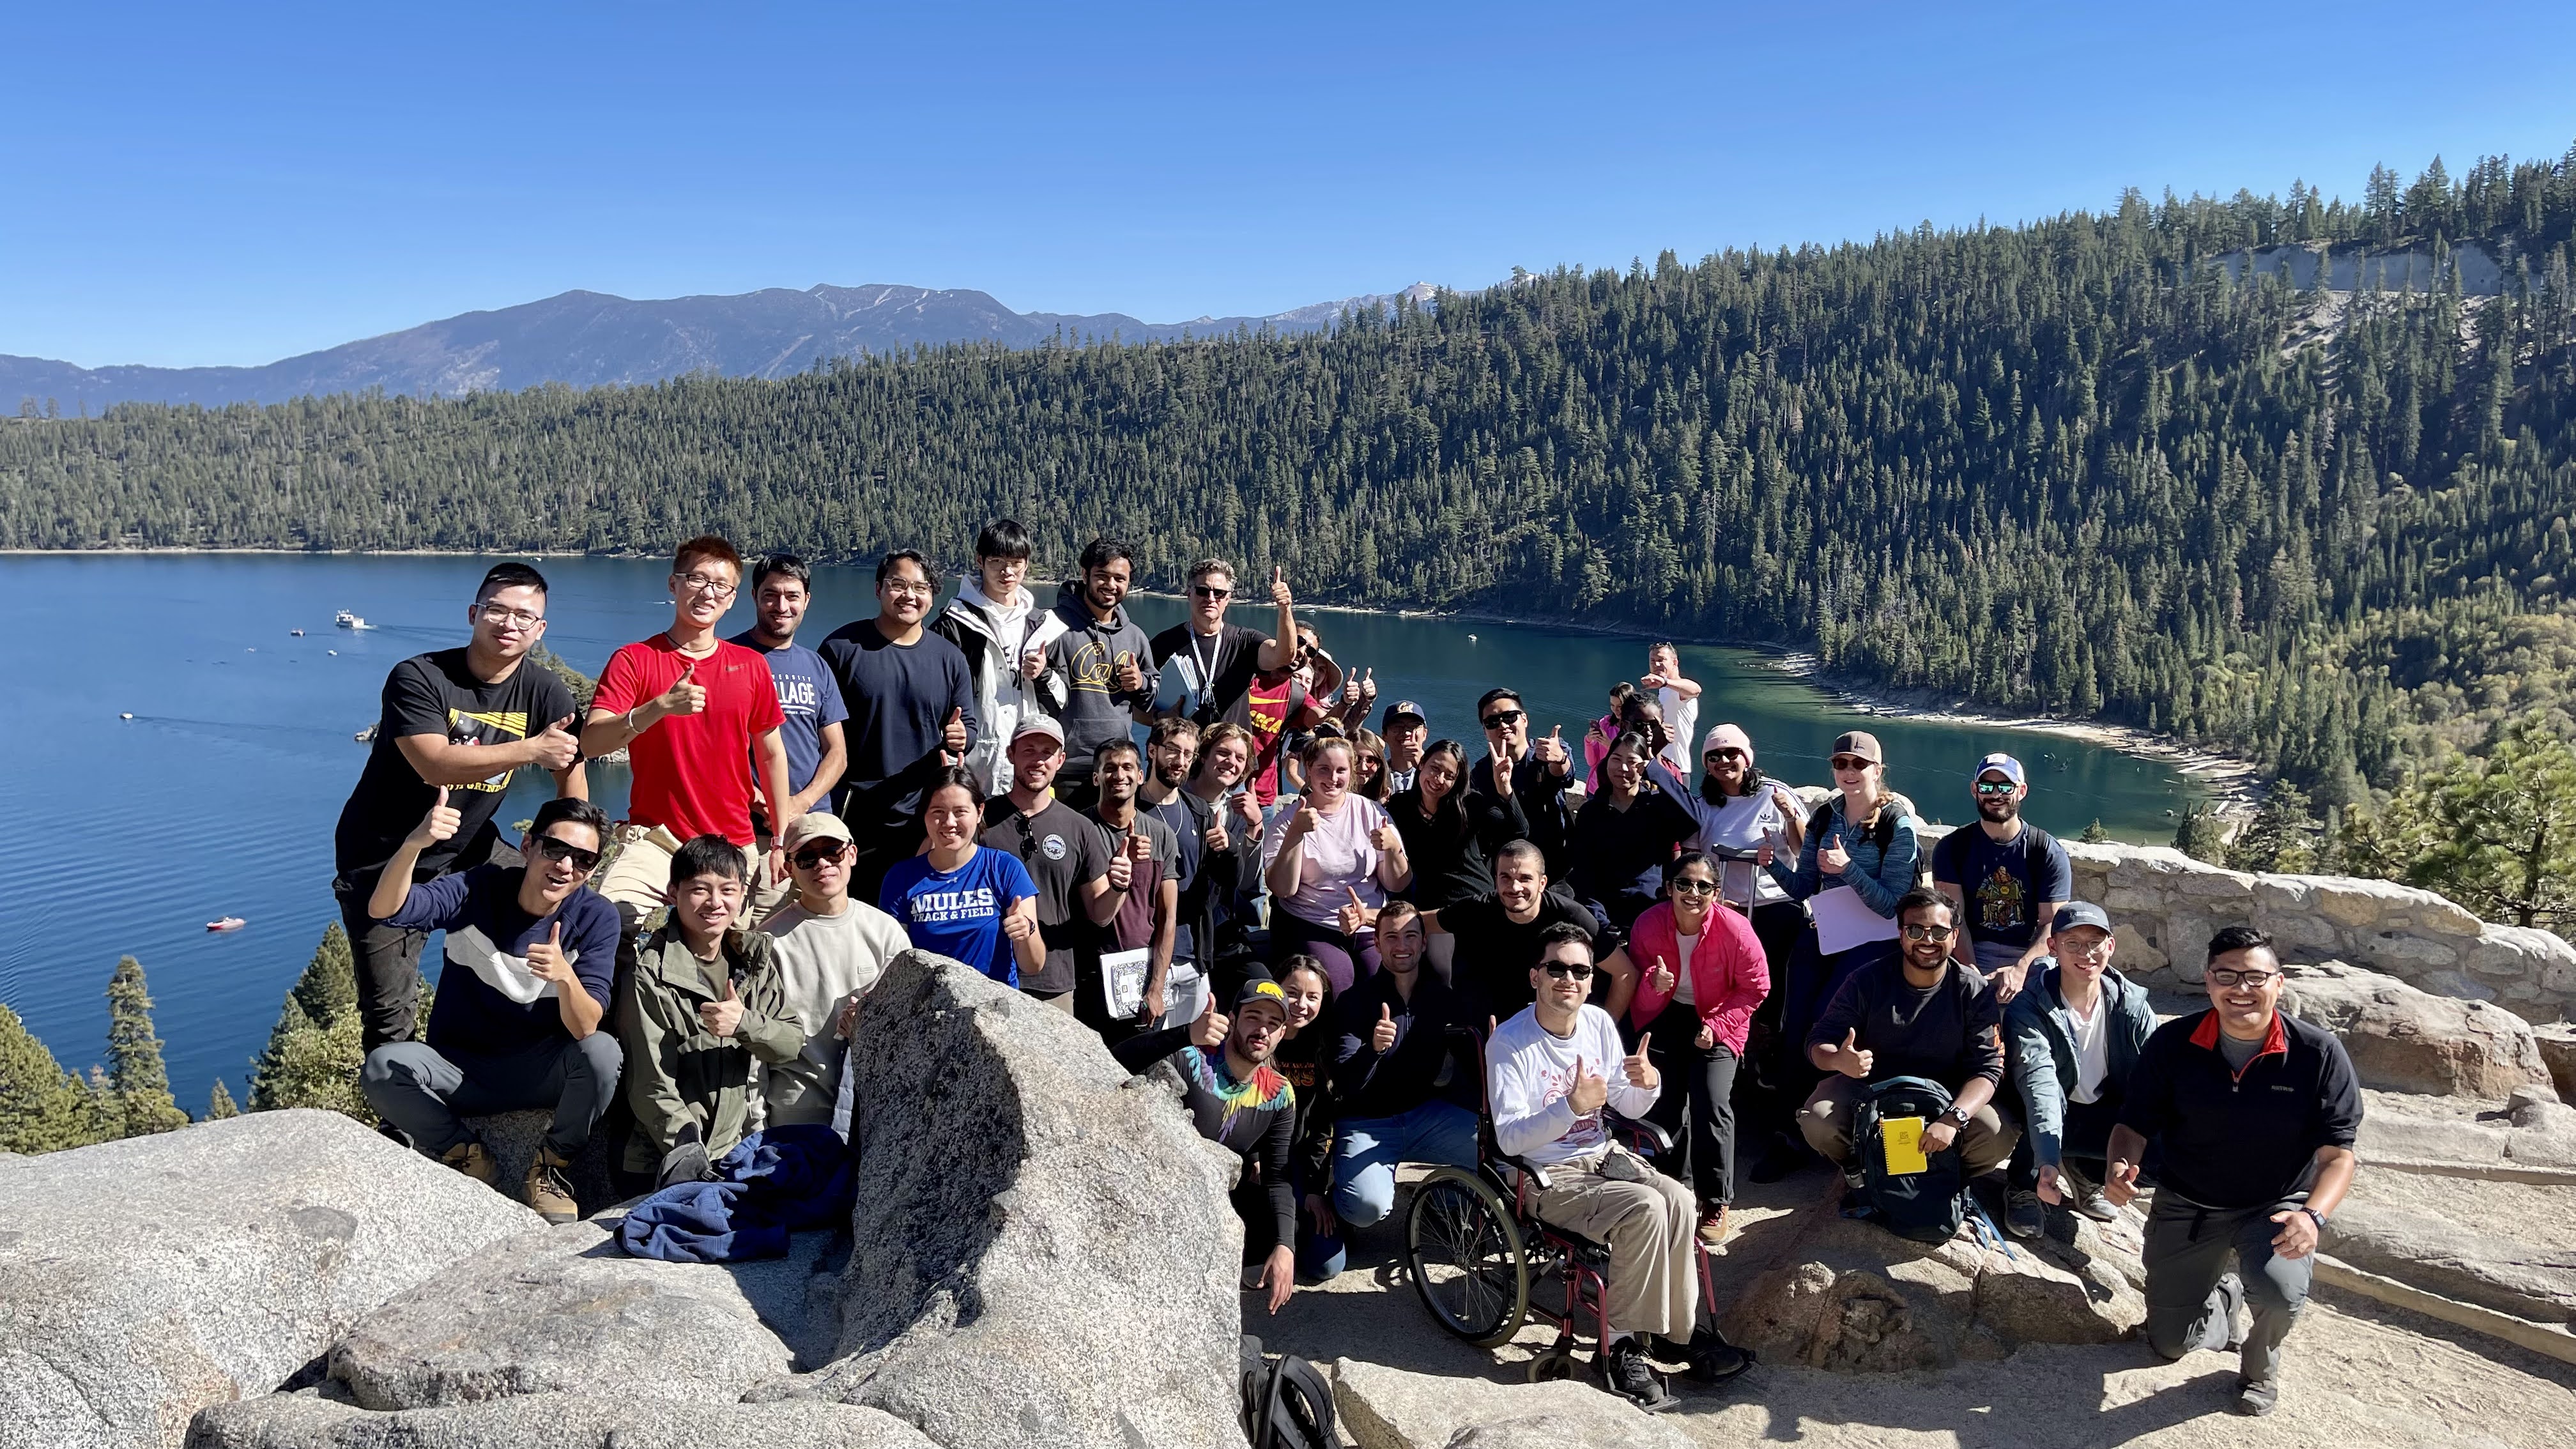 Geosystems MS students enjoying a beautiful day studying the active Tahoe-Sierra Fault Zone, Emerald Bay, Lake Tahoe, CA.